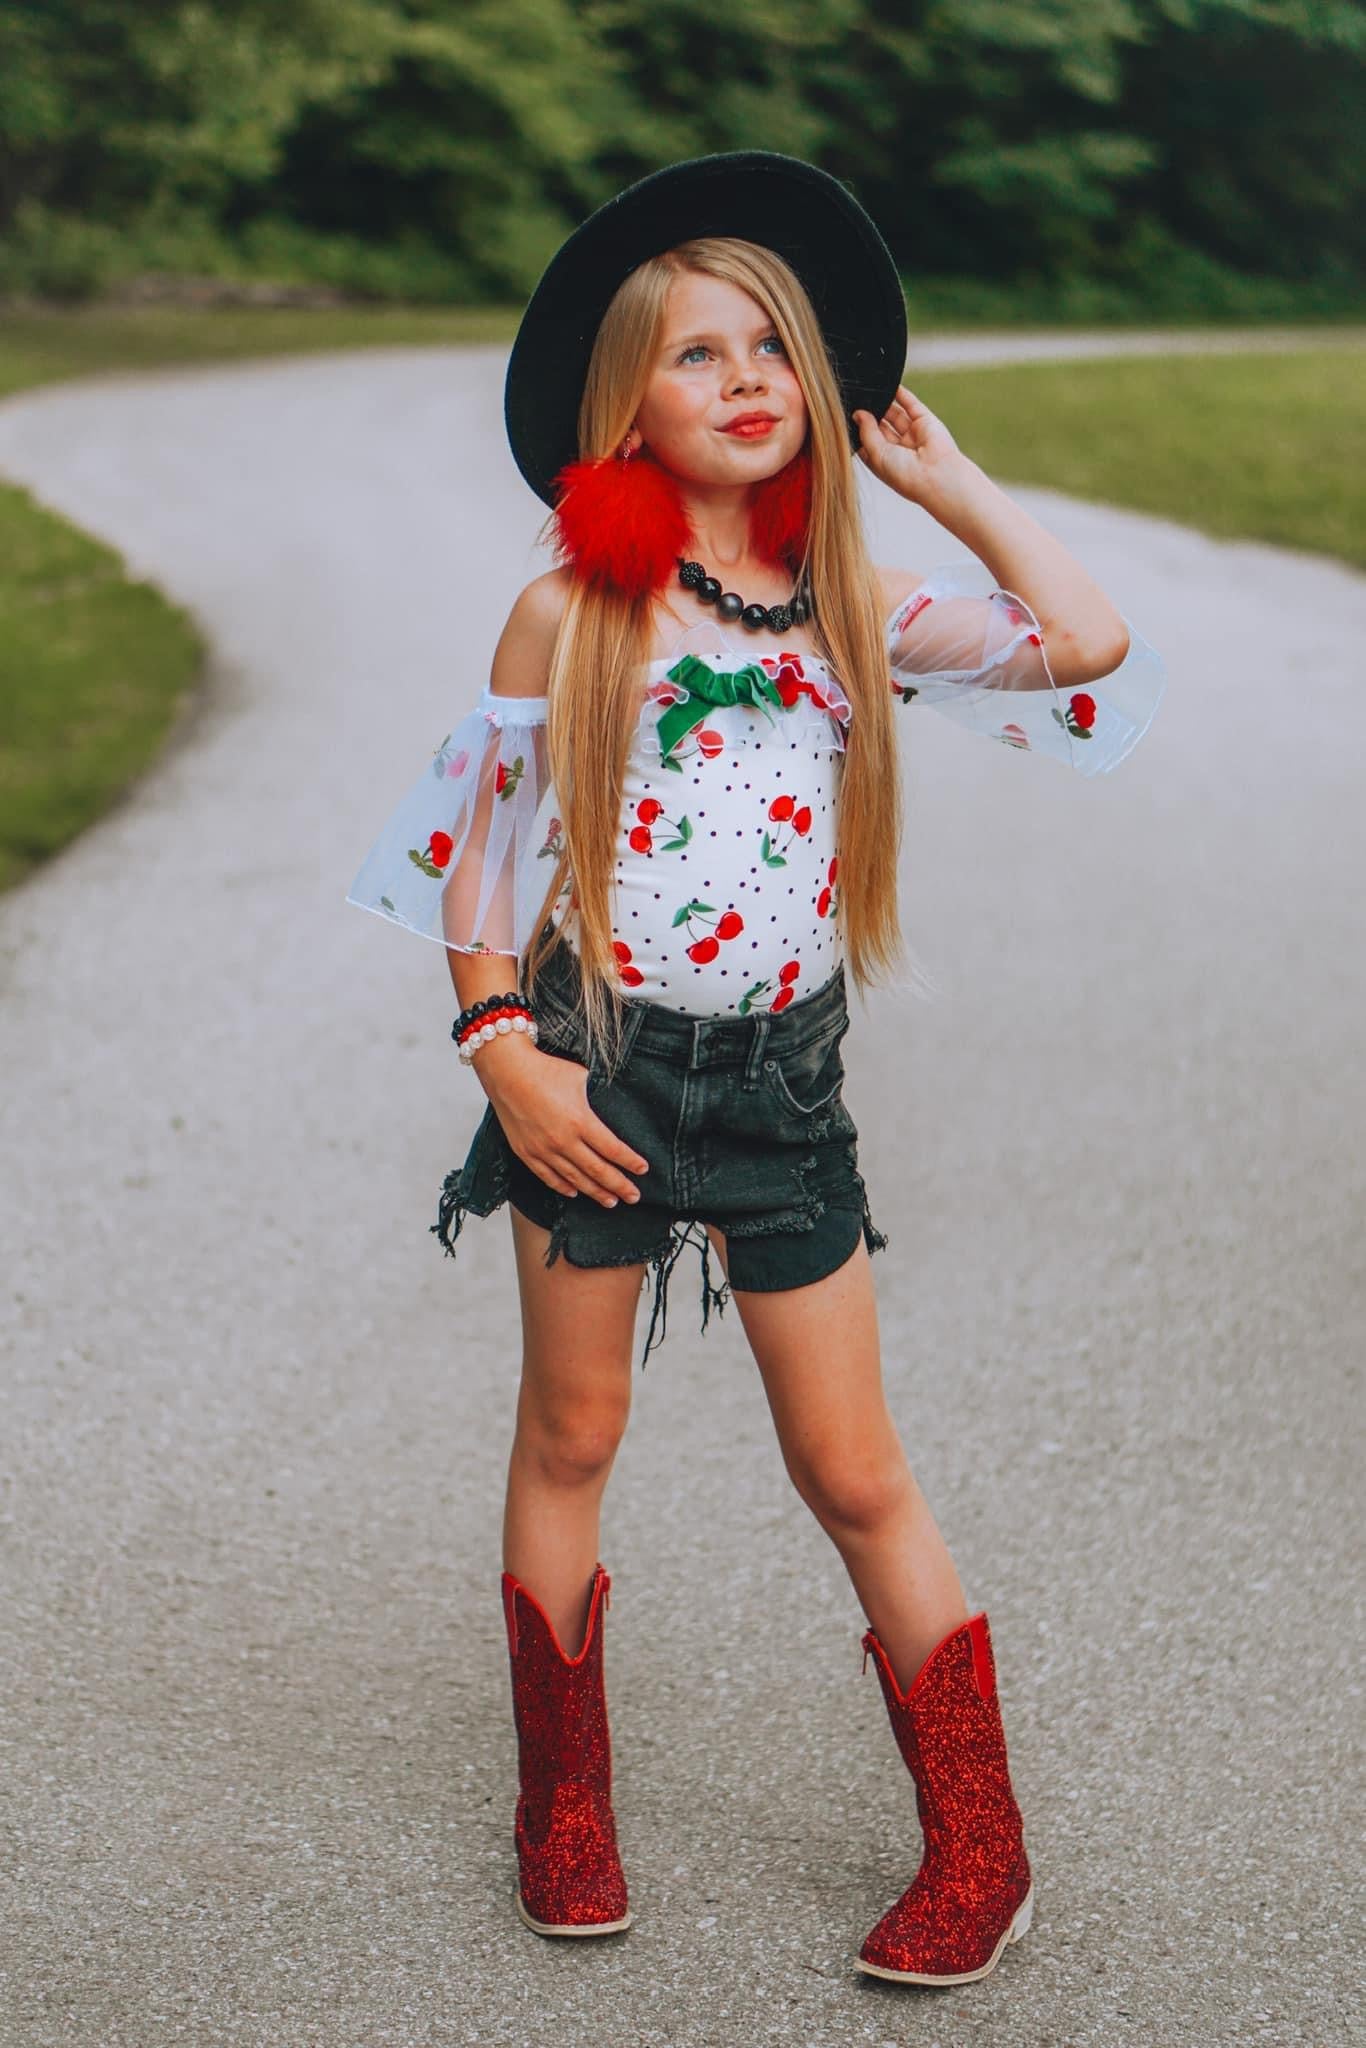 Lil’ Western Cowboy Cowgirl Boots Ruby Red Glitter ❣️We recommend to size up!❣️